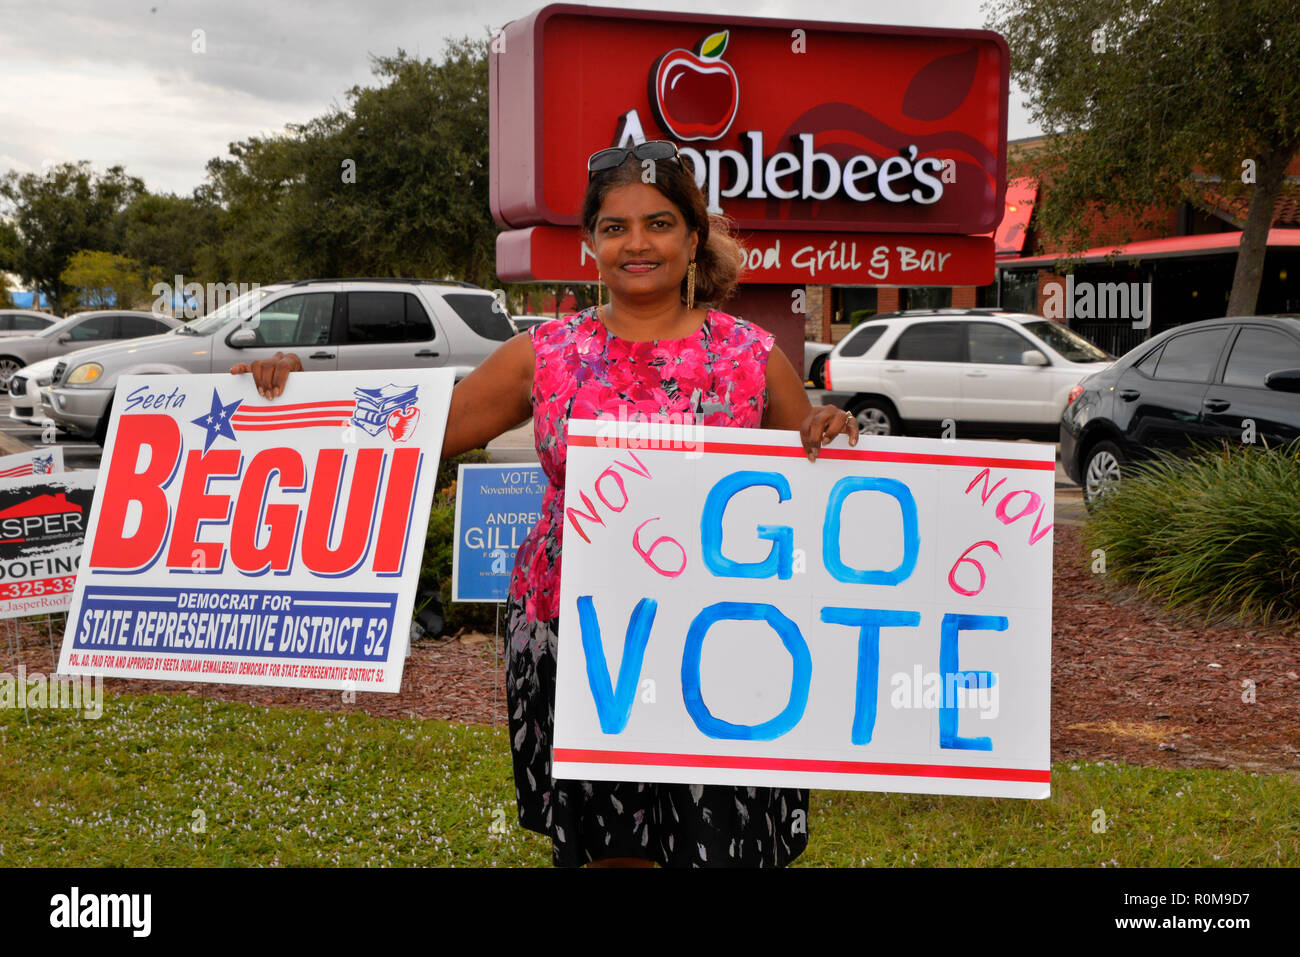 Melbourne, Florida, USA.  November 5, 2018 Candidates wave their political signs until sunset to get their massage out to the public who have not voted yet. Last day to vote in person is November 6 polls open at 0700 until 1900 hours. Photo Credit Julian Leek / Alamy Live News Stock Photo